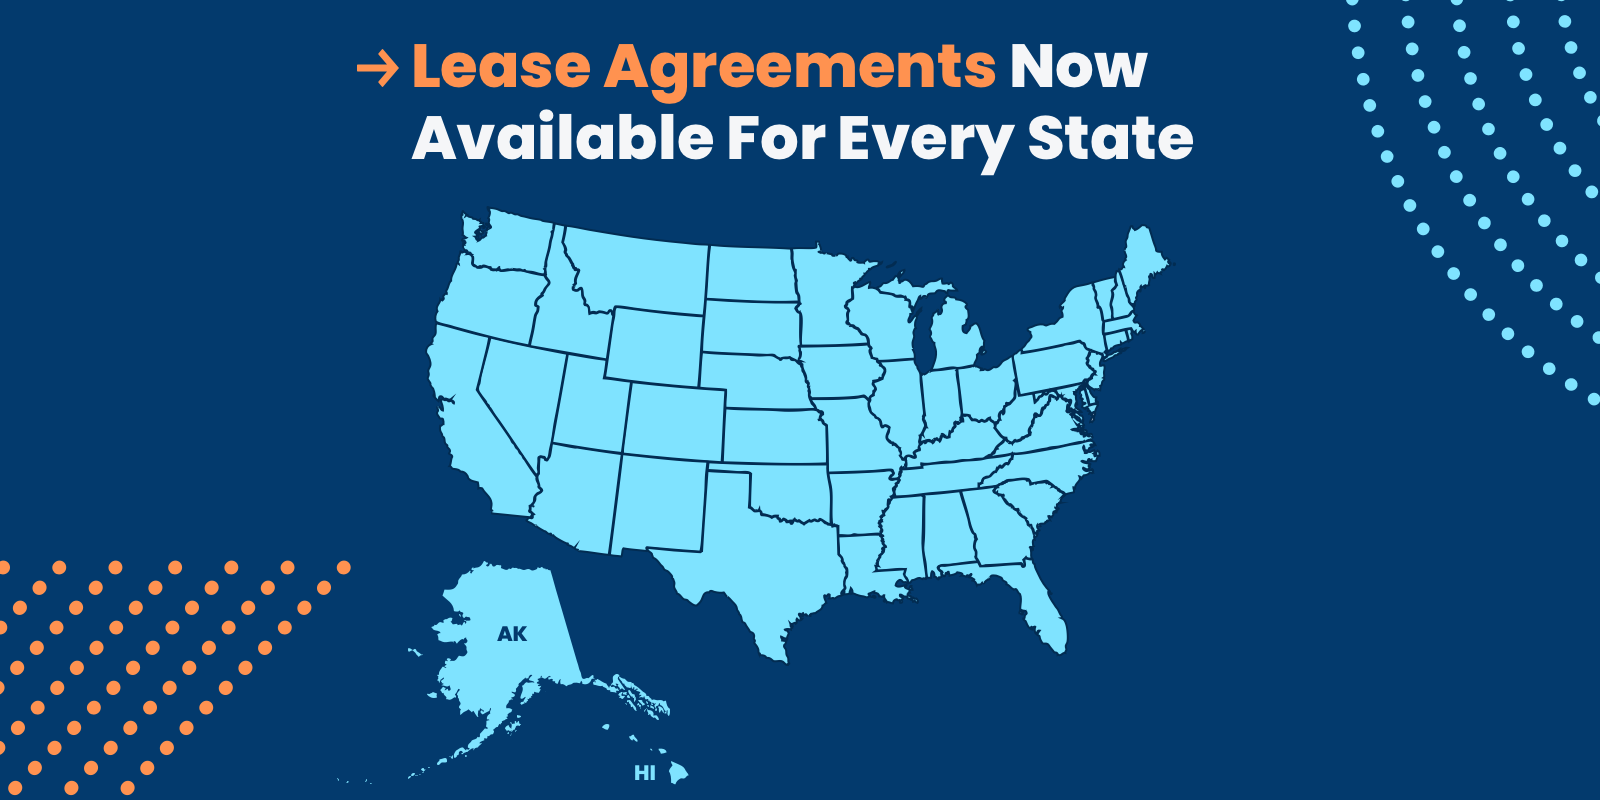 State Specific Lease Agreements